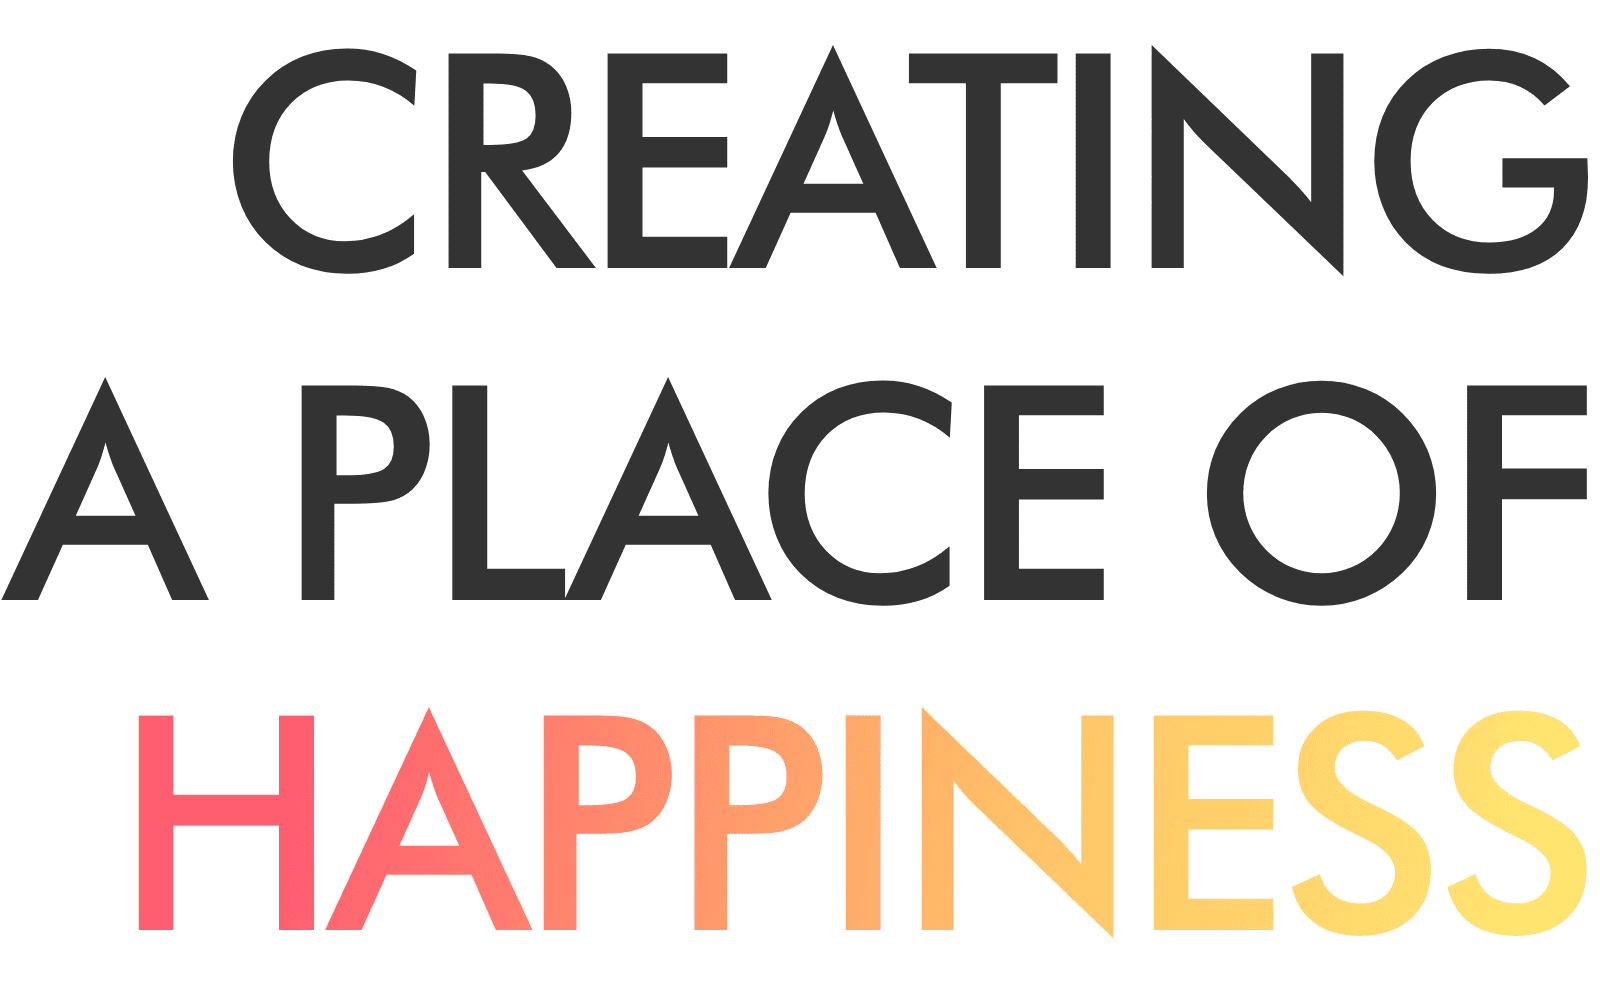 CREATING A PLACE OF HAPPINESS